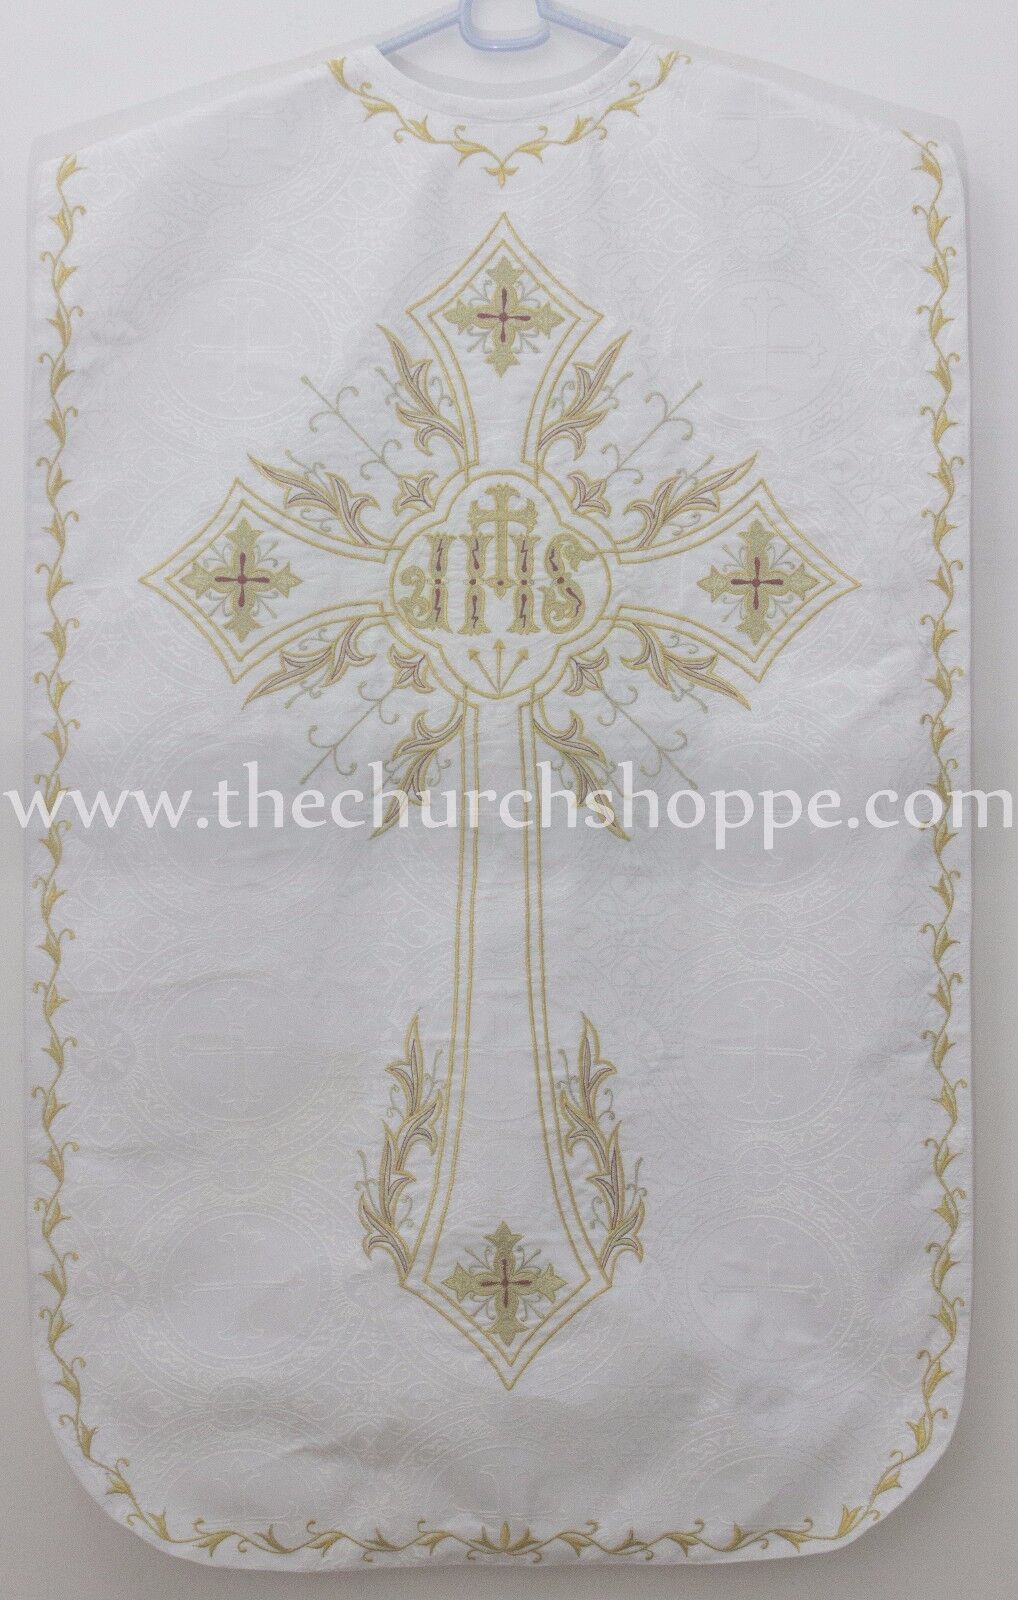 White Roman Chasuble Fiddleback Vestment and 5pcs mass set IHS embroidery NEW 